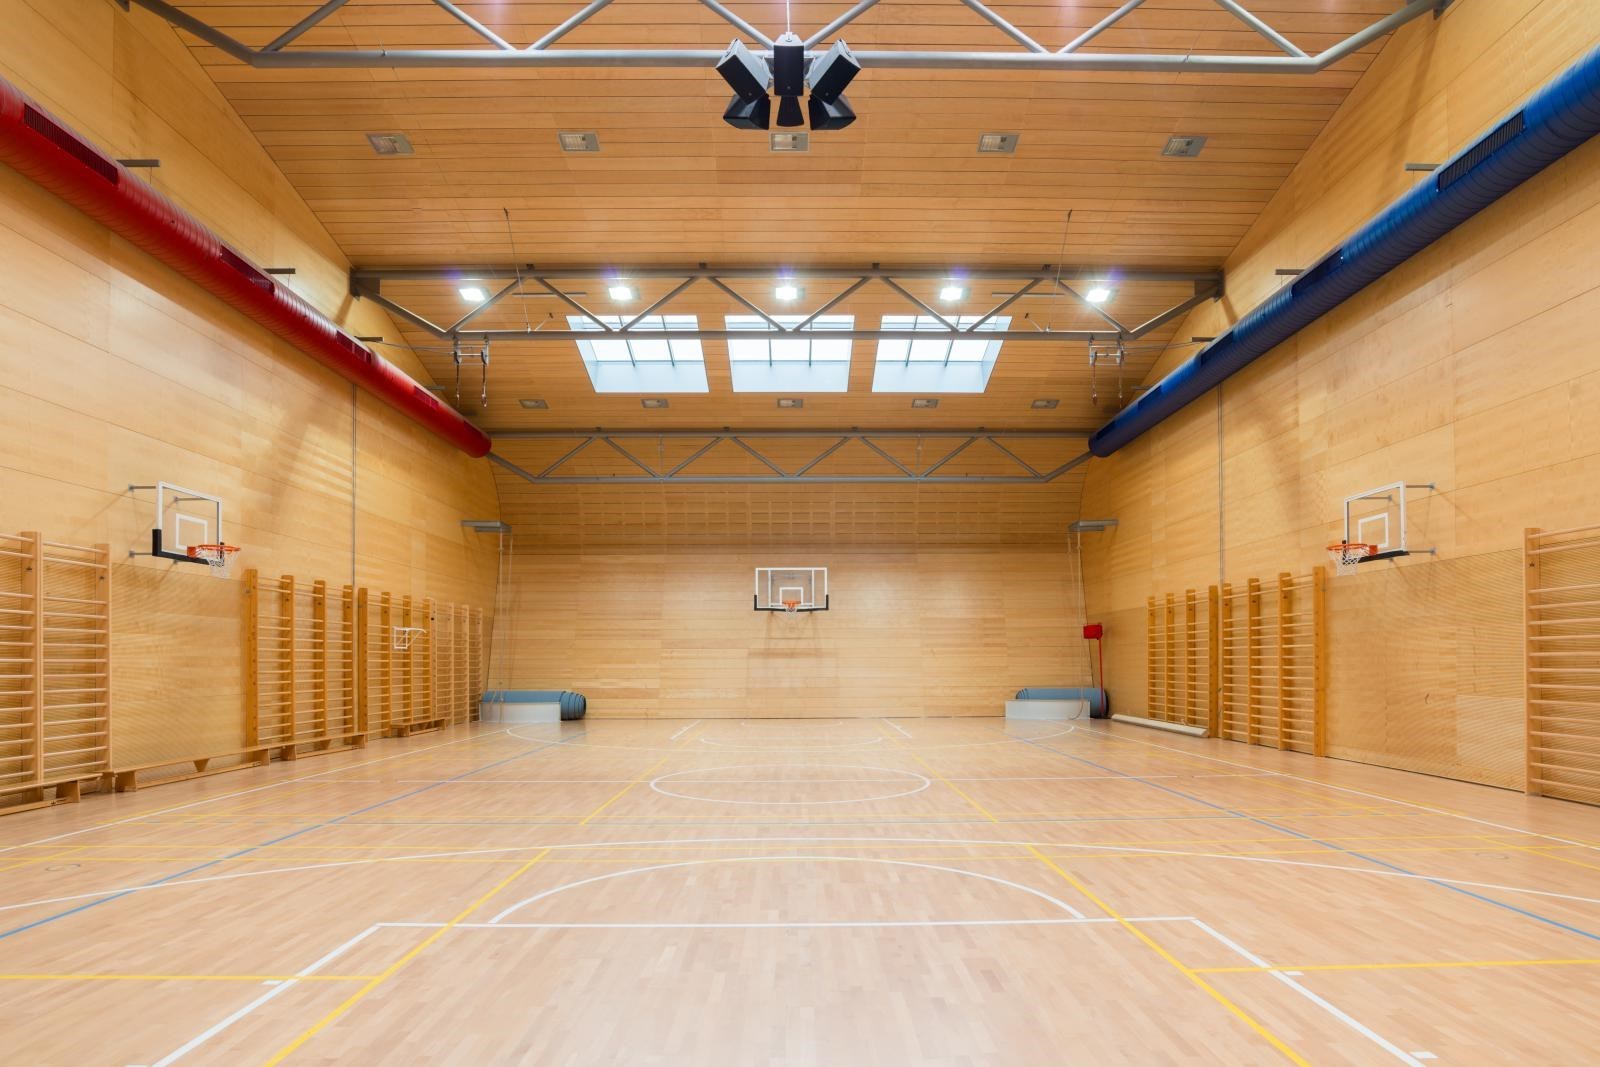 Gyms of Faculty of Sports Studies, MU, Brno